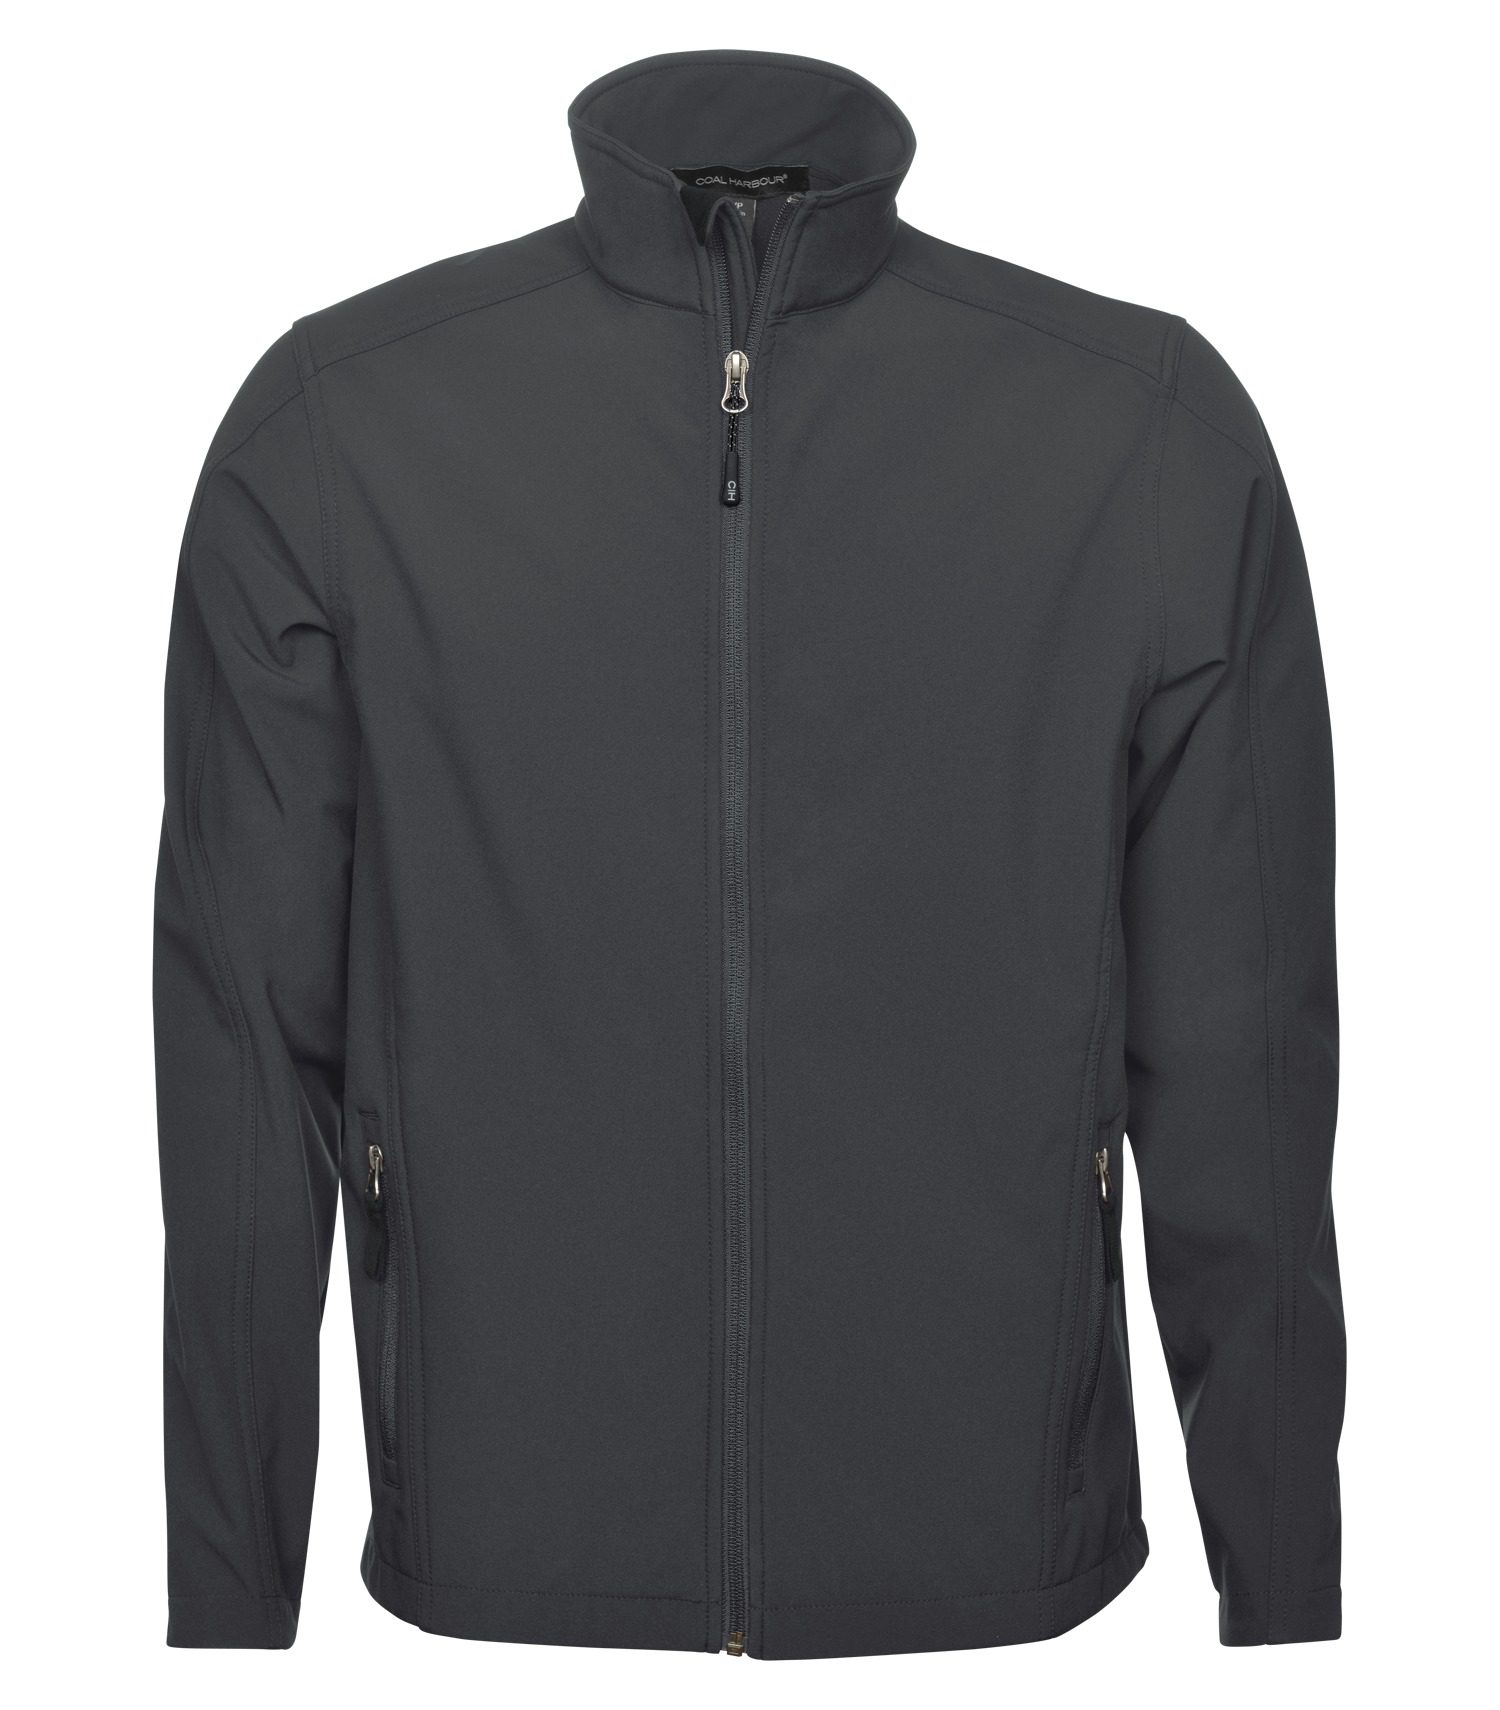 COAL HARBOUR EVERYDAY WATER REPELLENT SOFT SHELL JACKET #J7603 Graphite